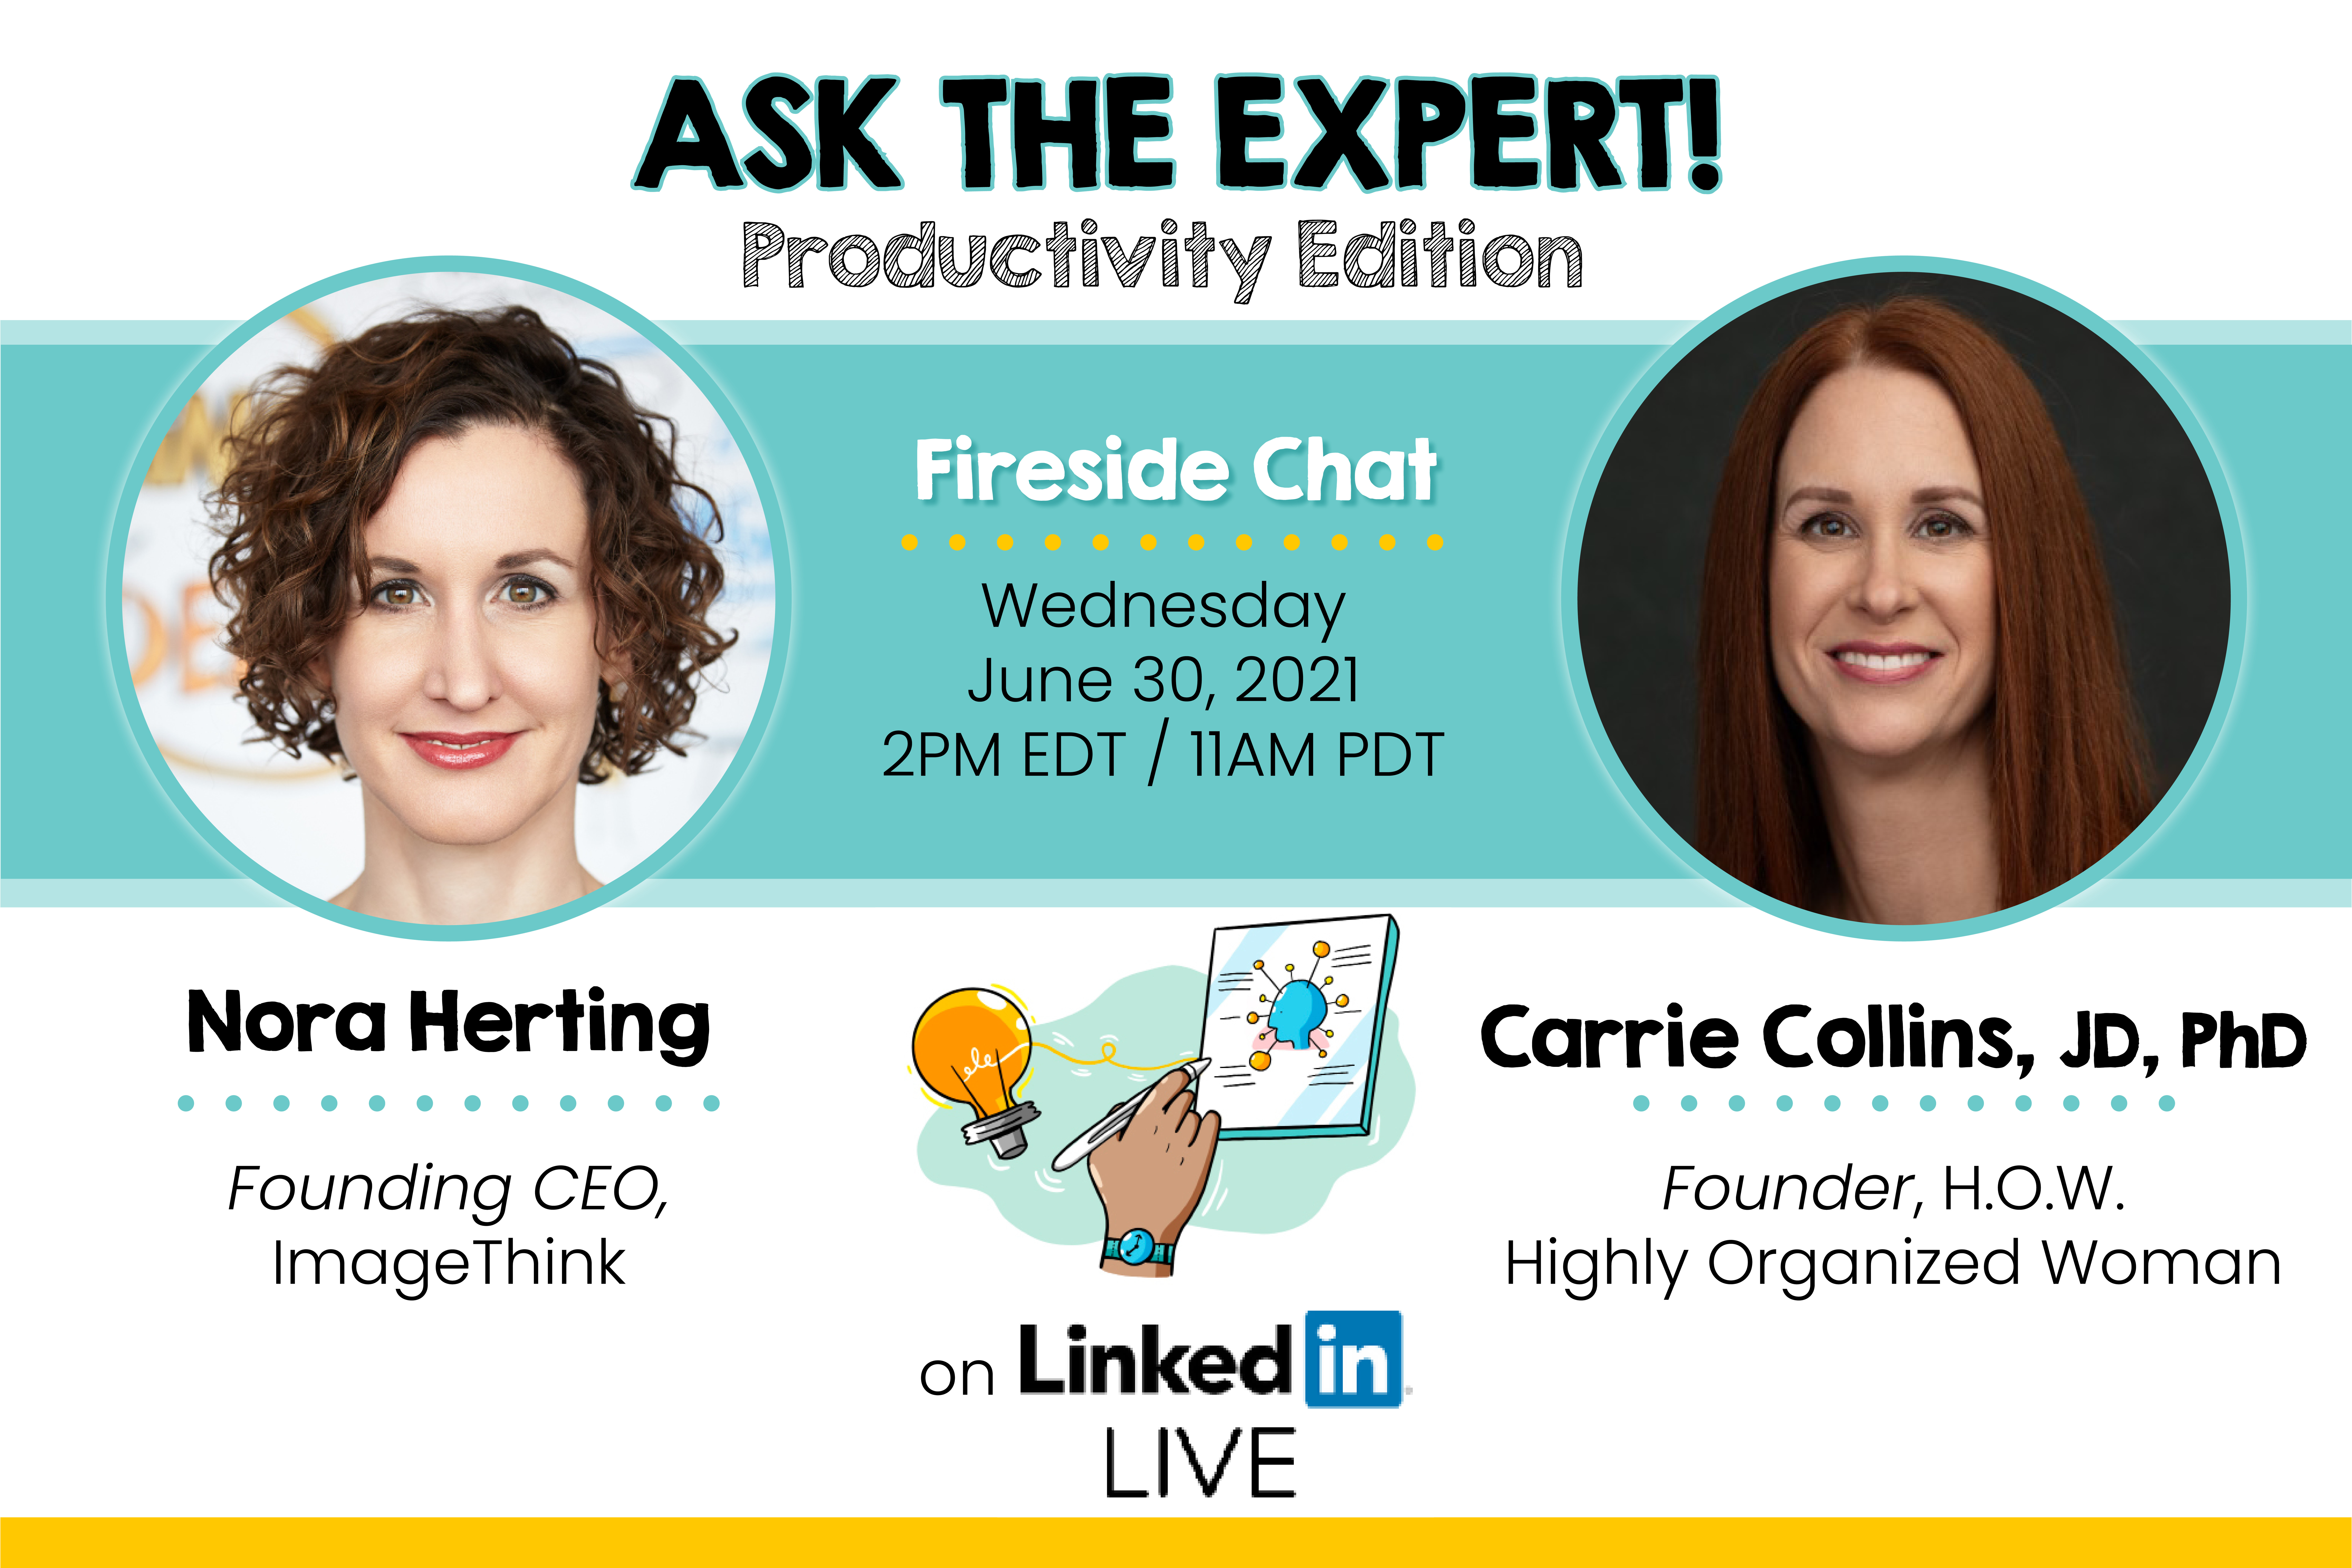 ImageThink founder Nora Herting and Carrie Collins, The Highly Organized Woman, on ASK THE EXPERT!